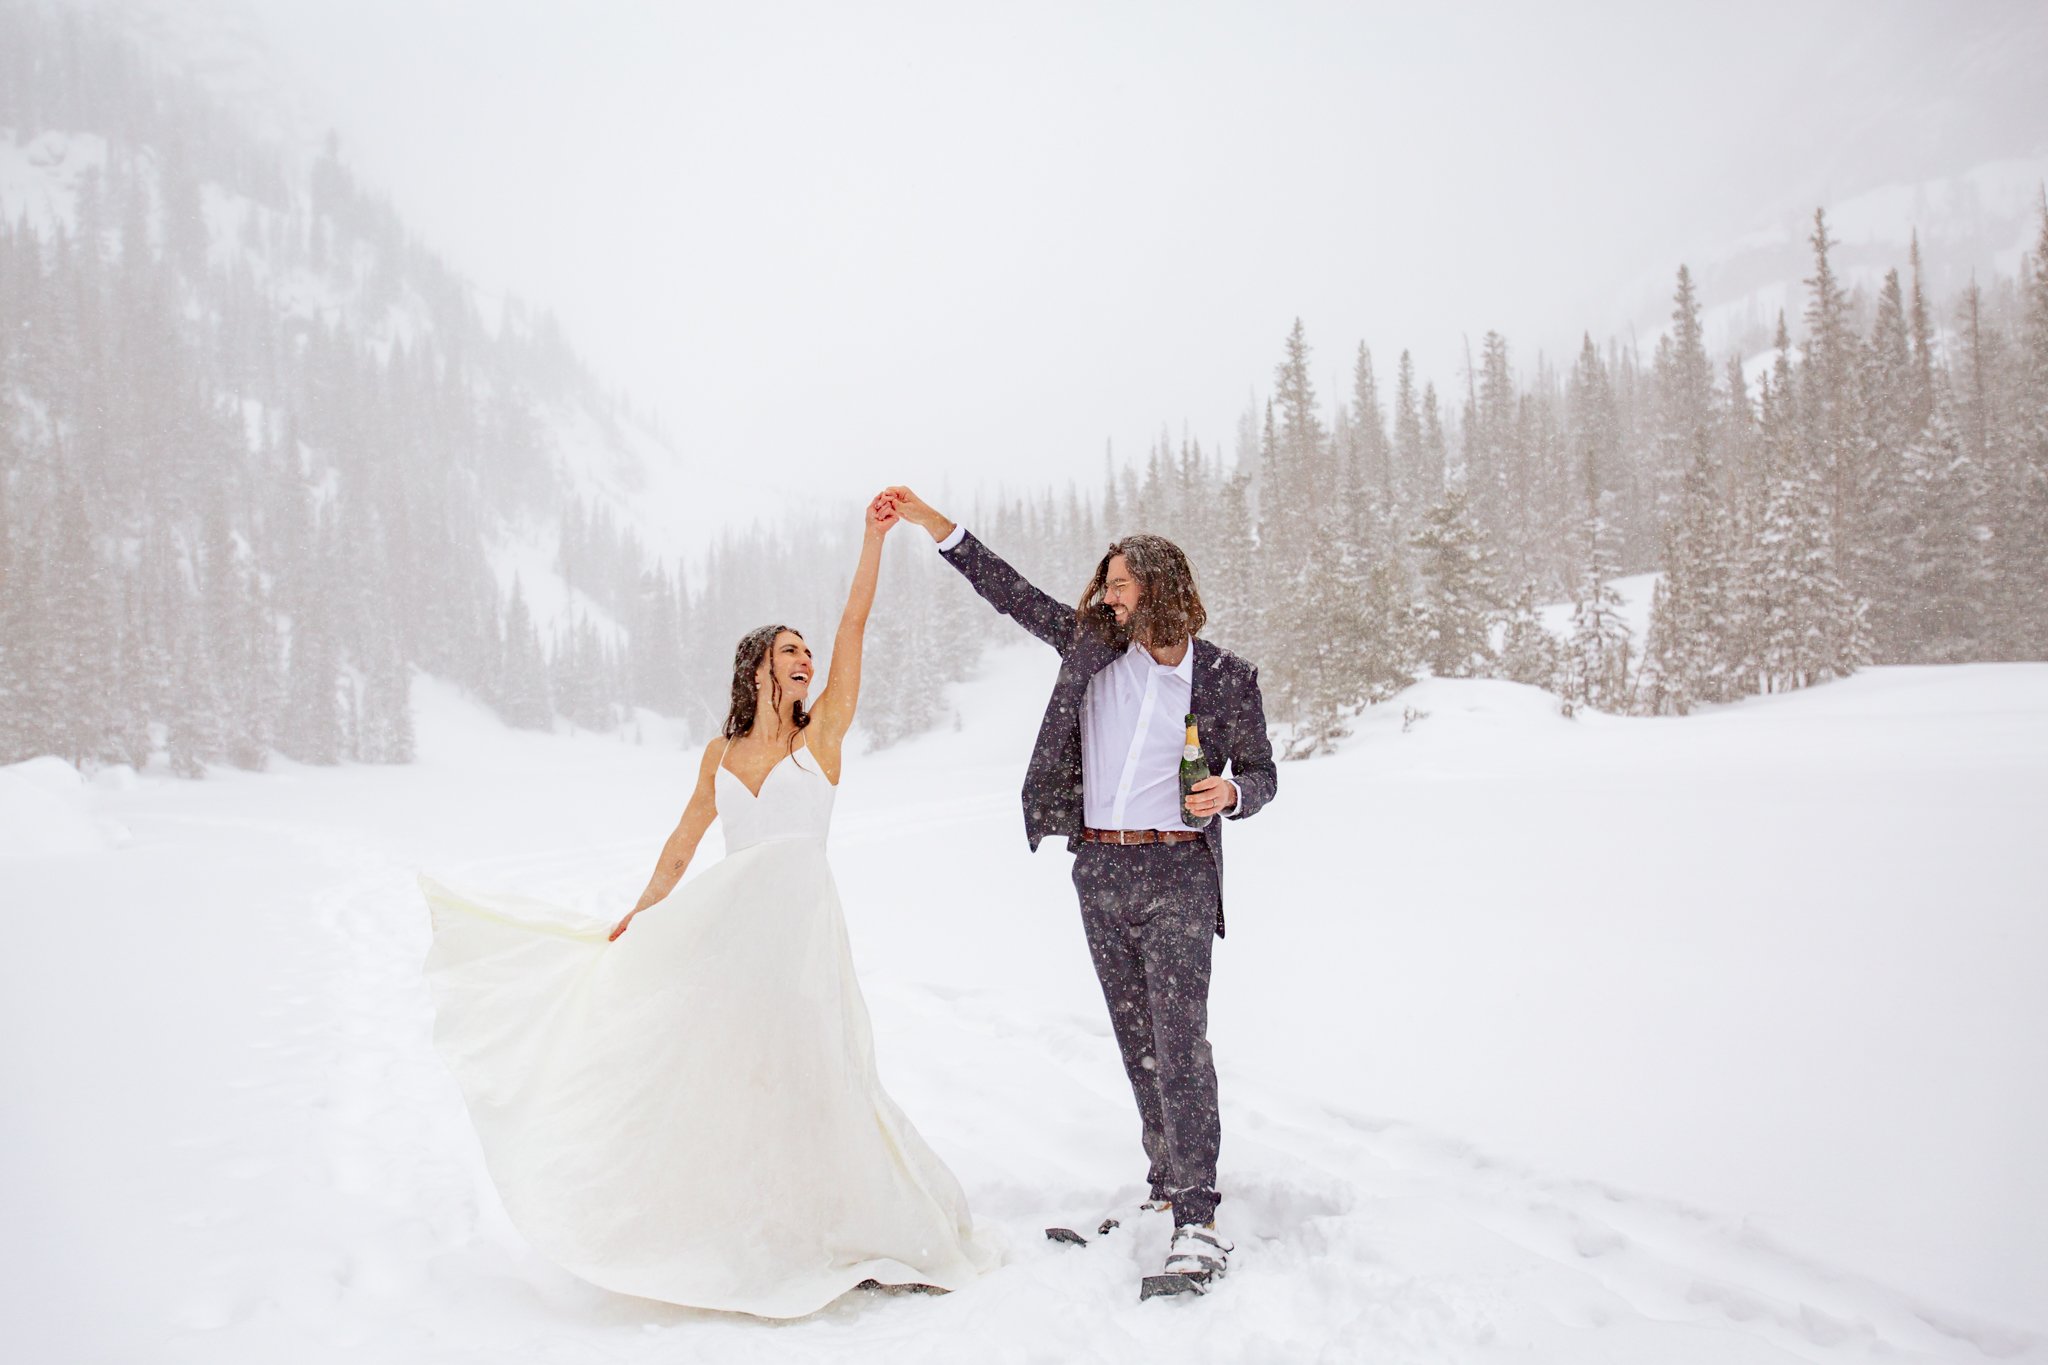  The groom spins his bride after eloping in Rocky Mountain National Park 